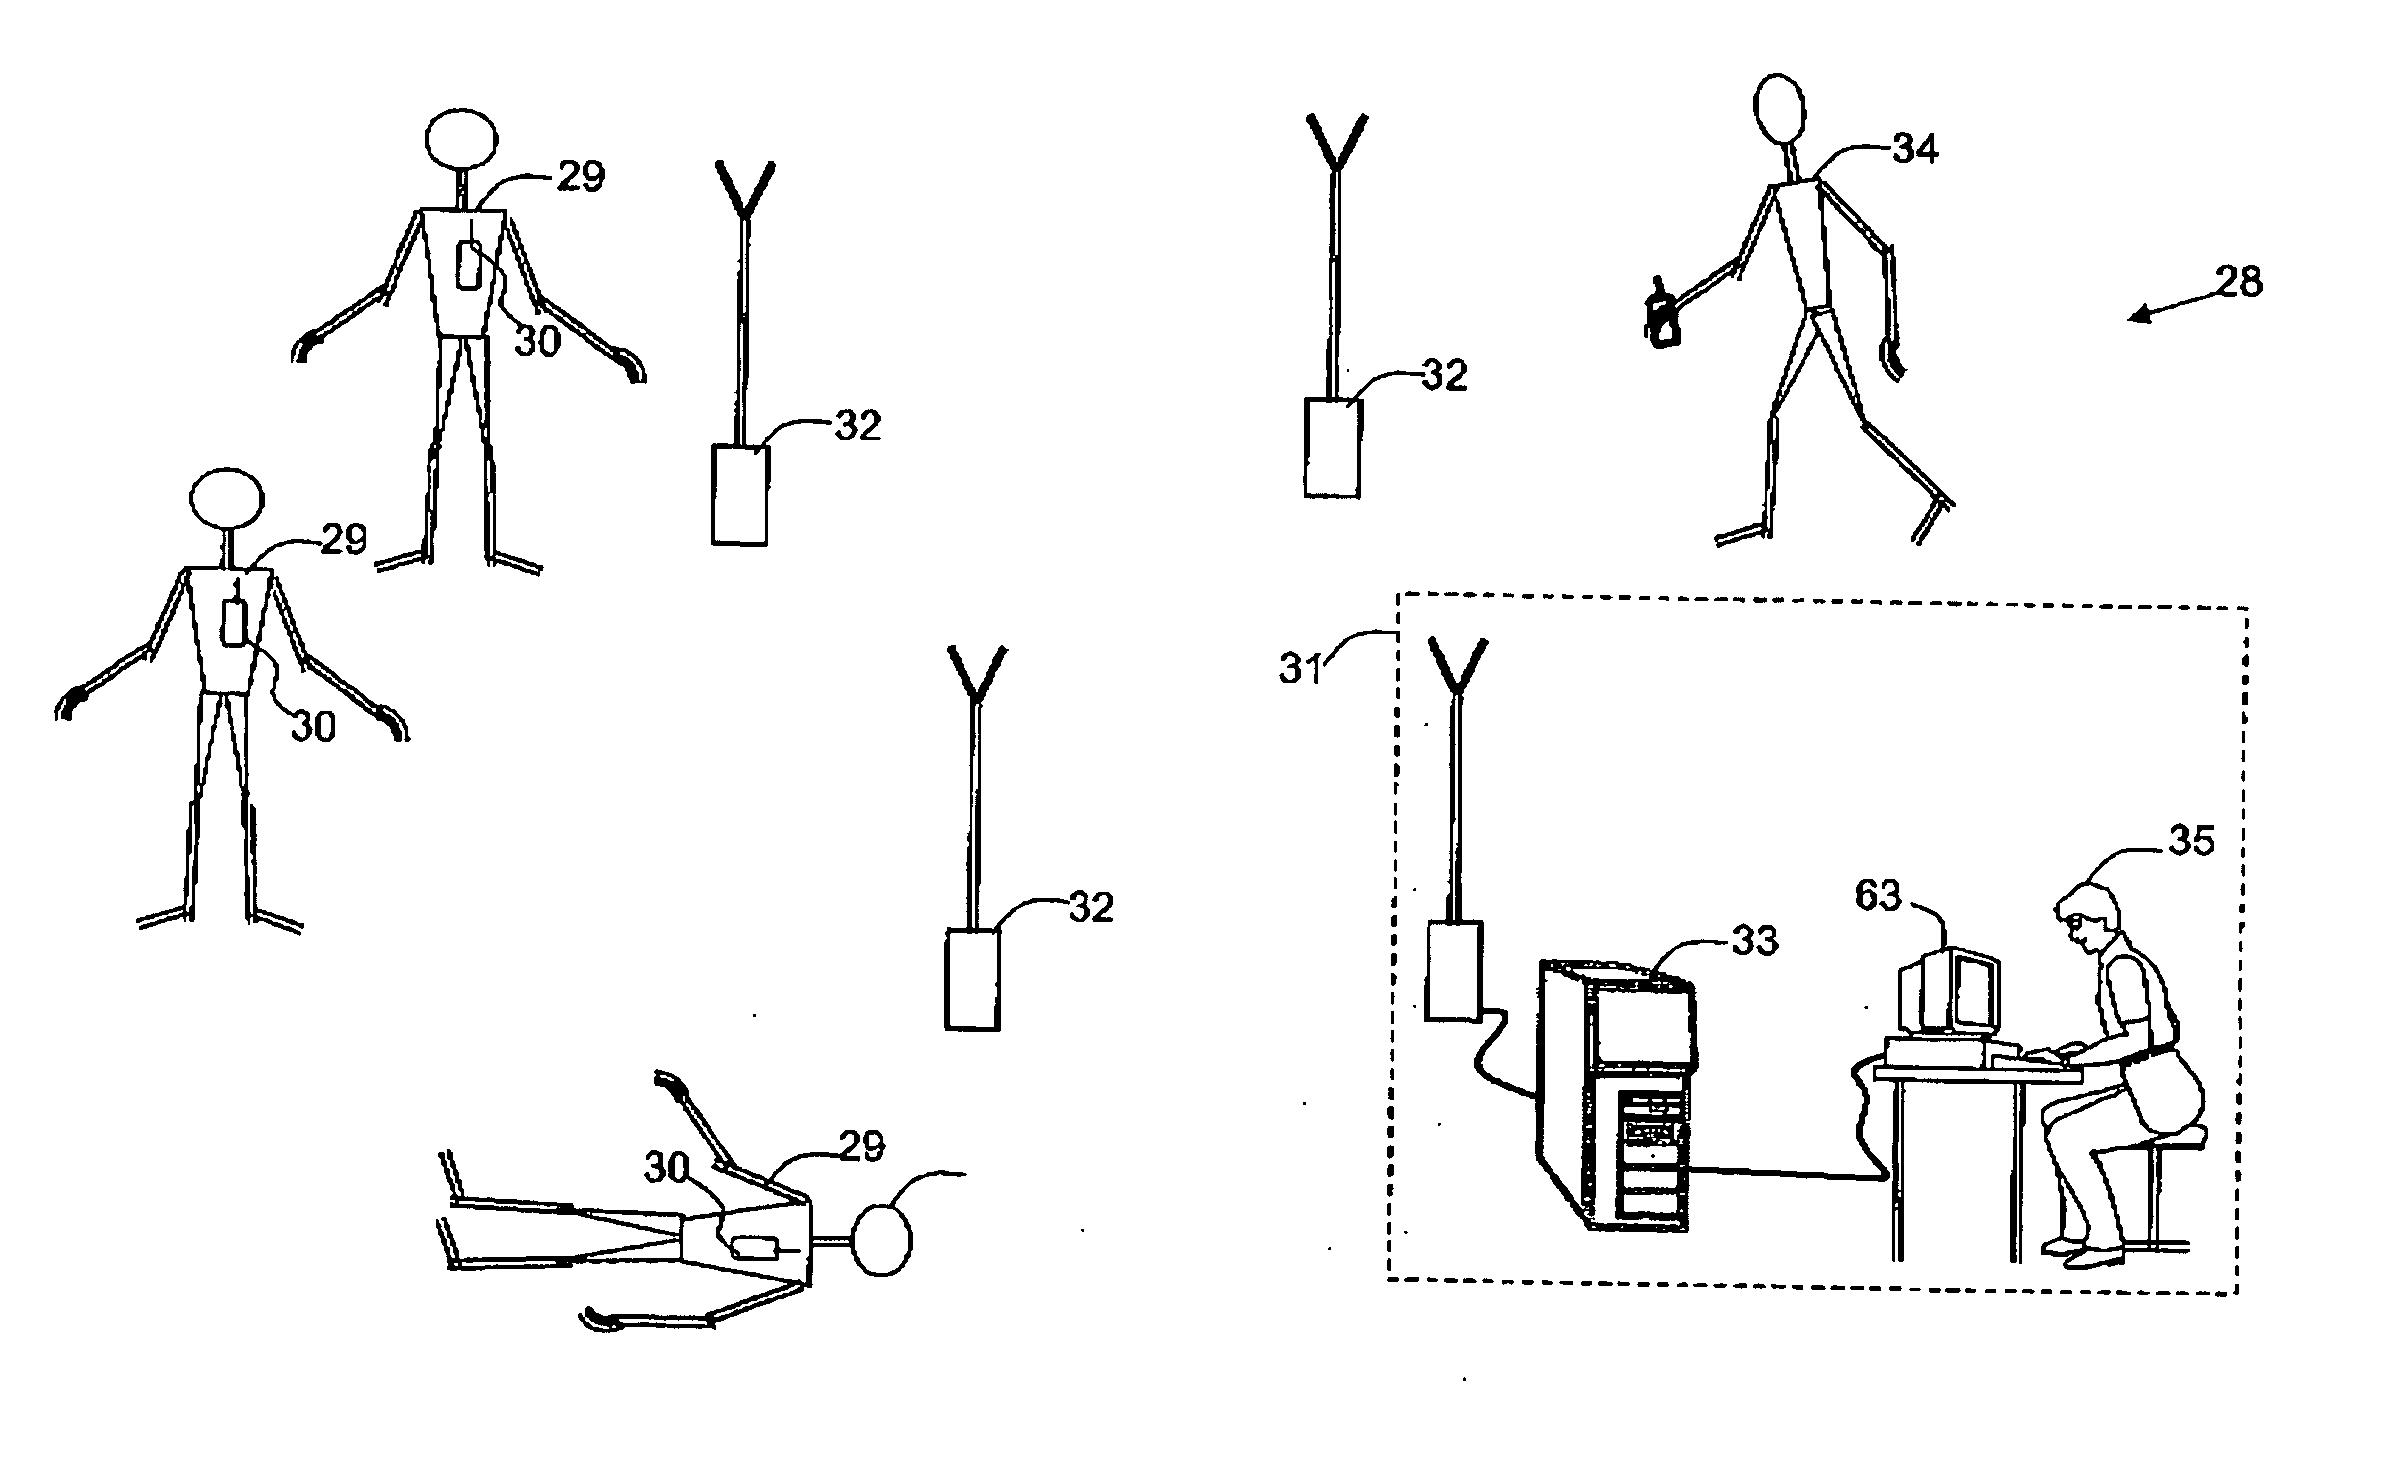 System for automatic structured analysis of body activities